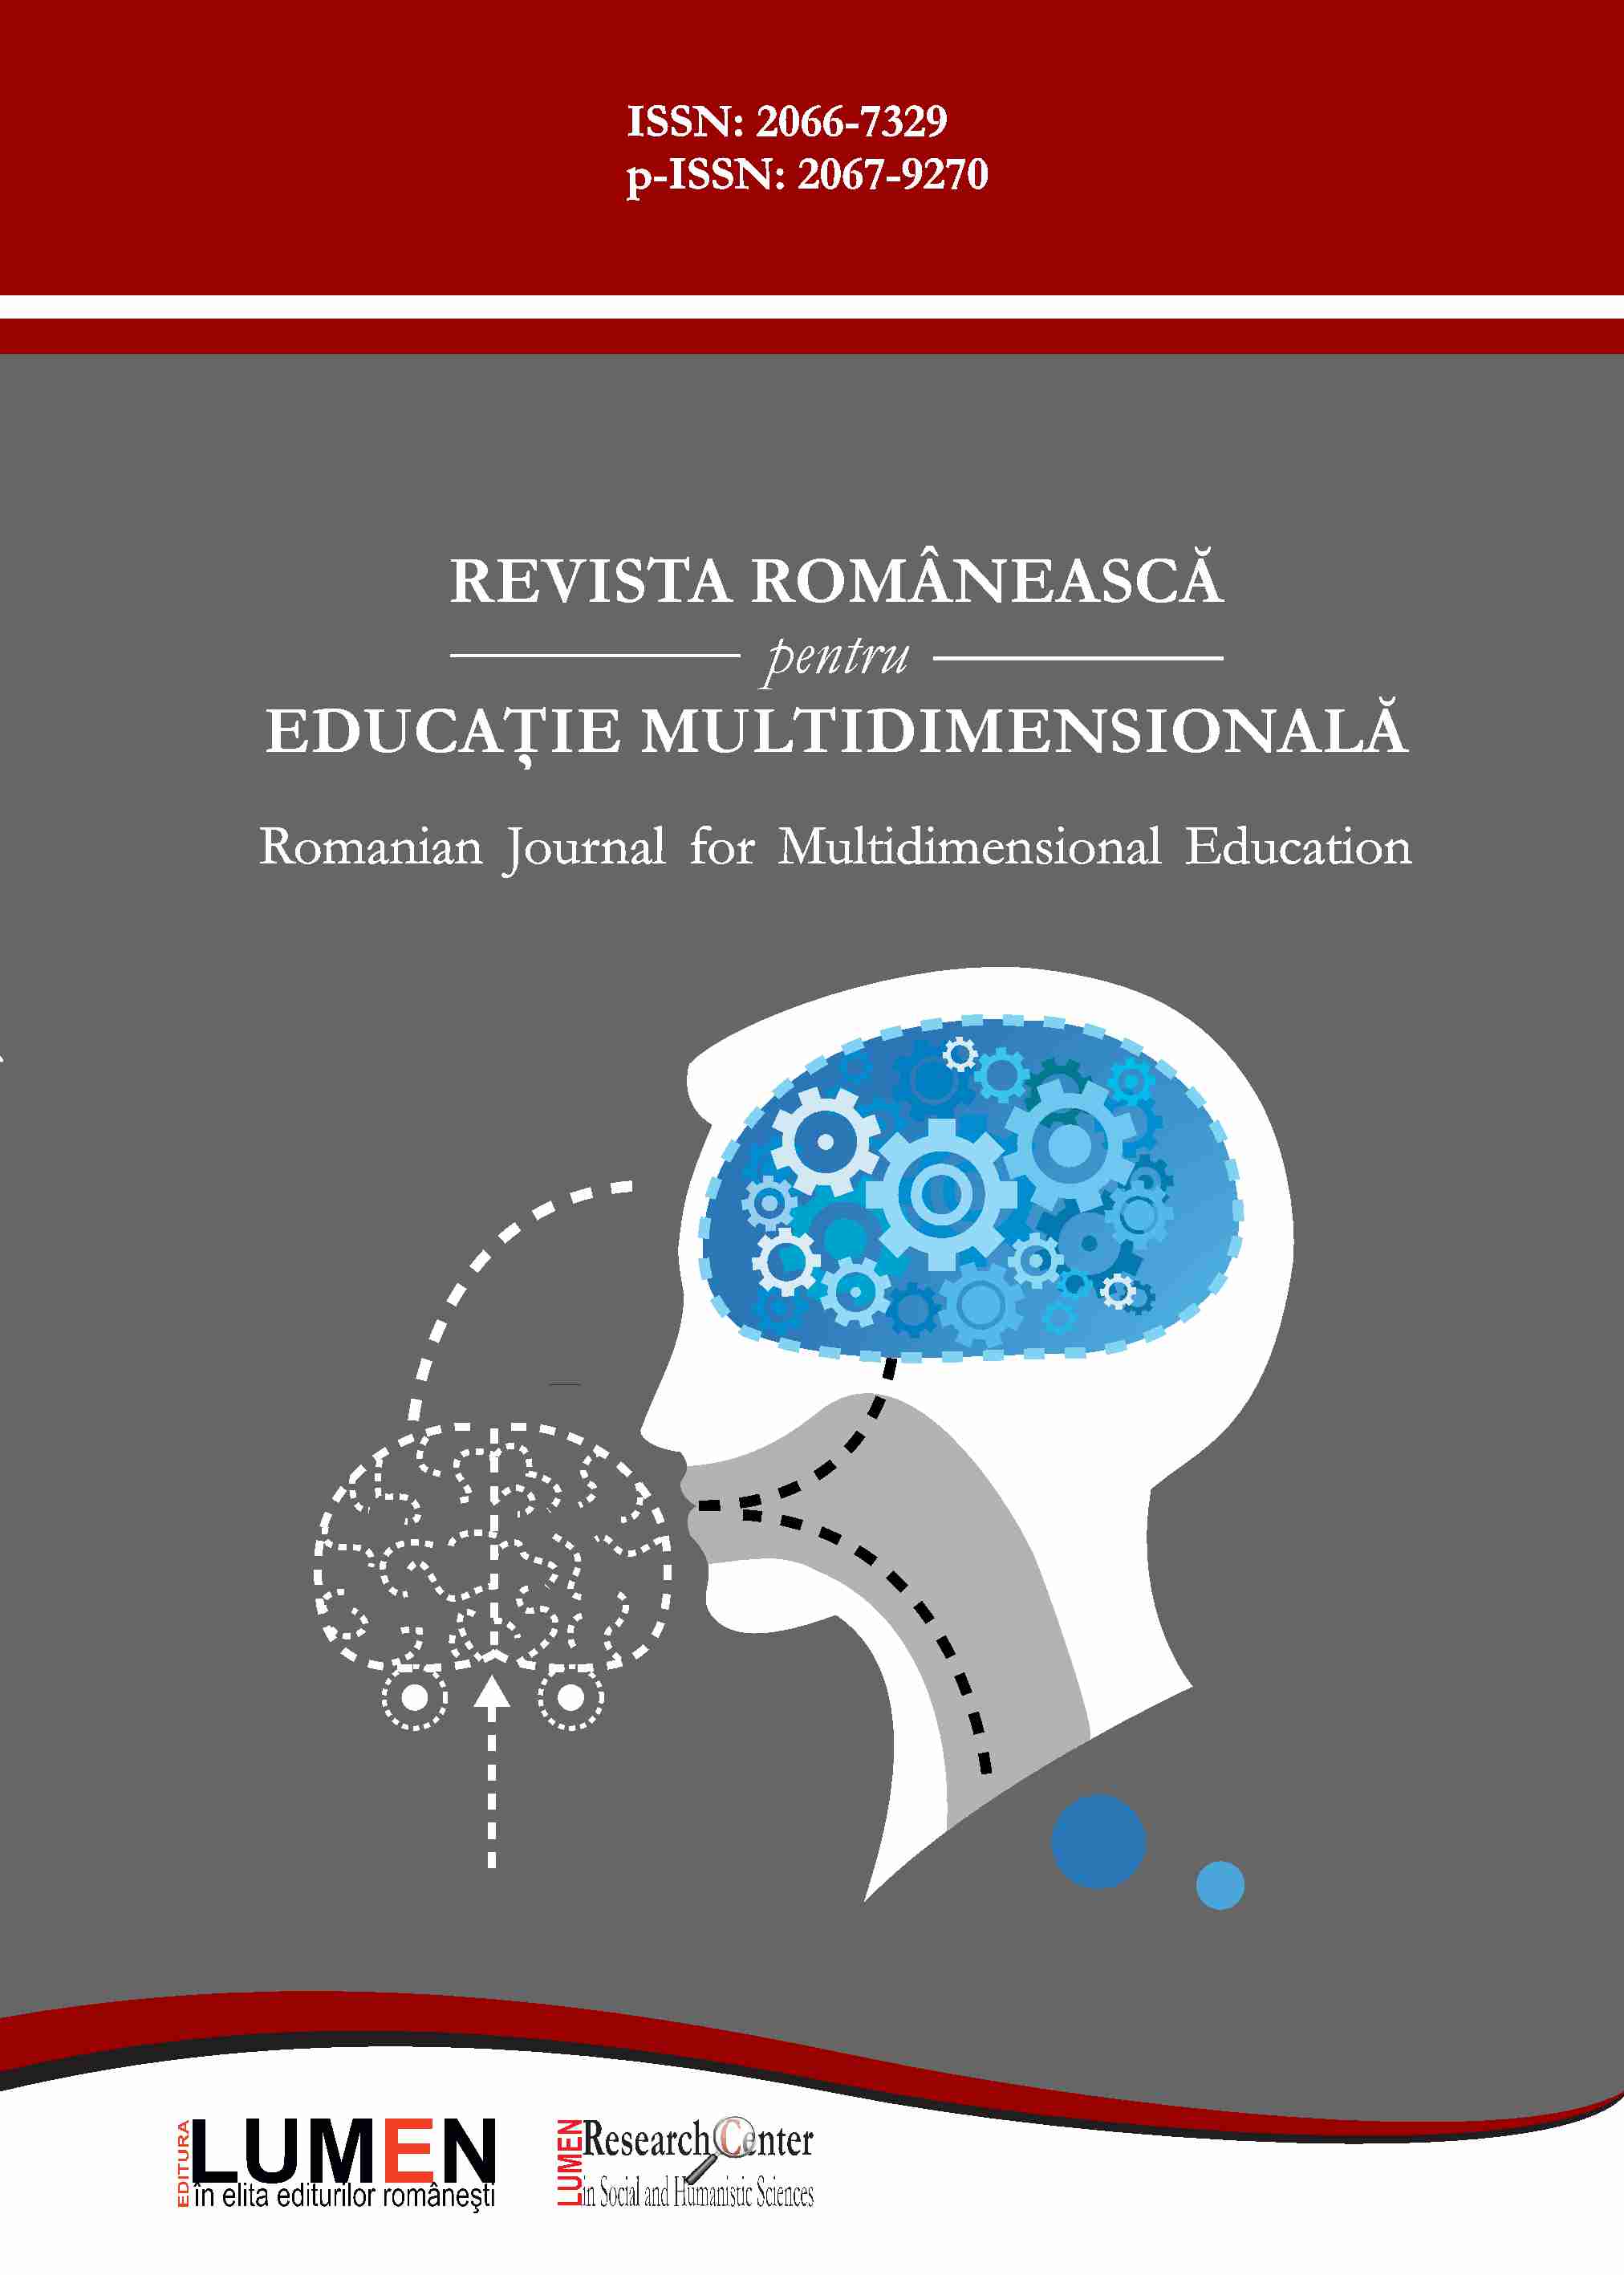 Formation of Motivation for Professional Communication among Future Specialists of Pedagogical Education